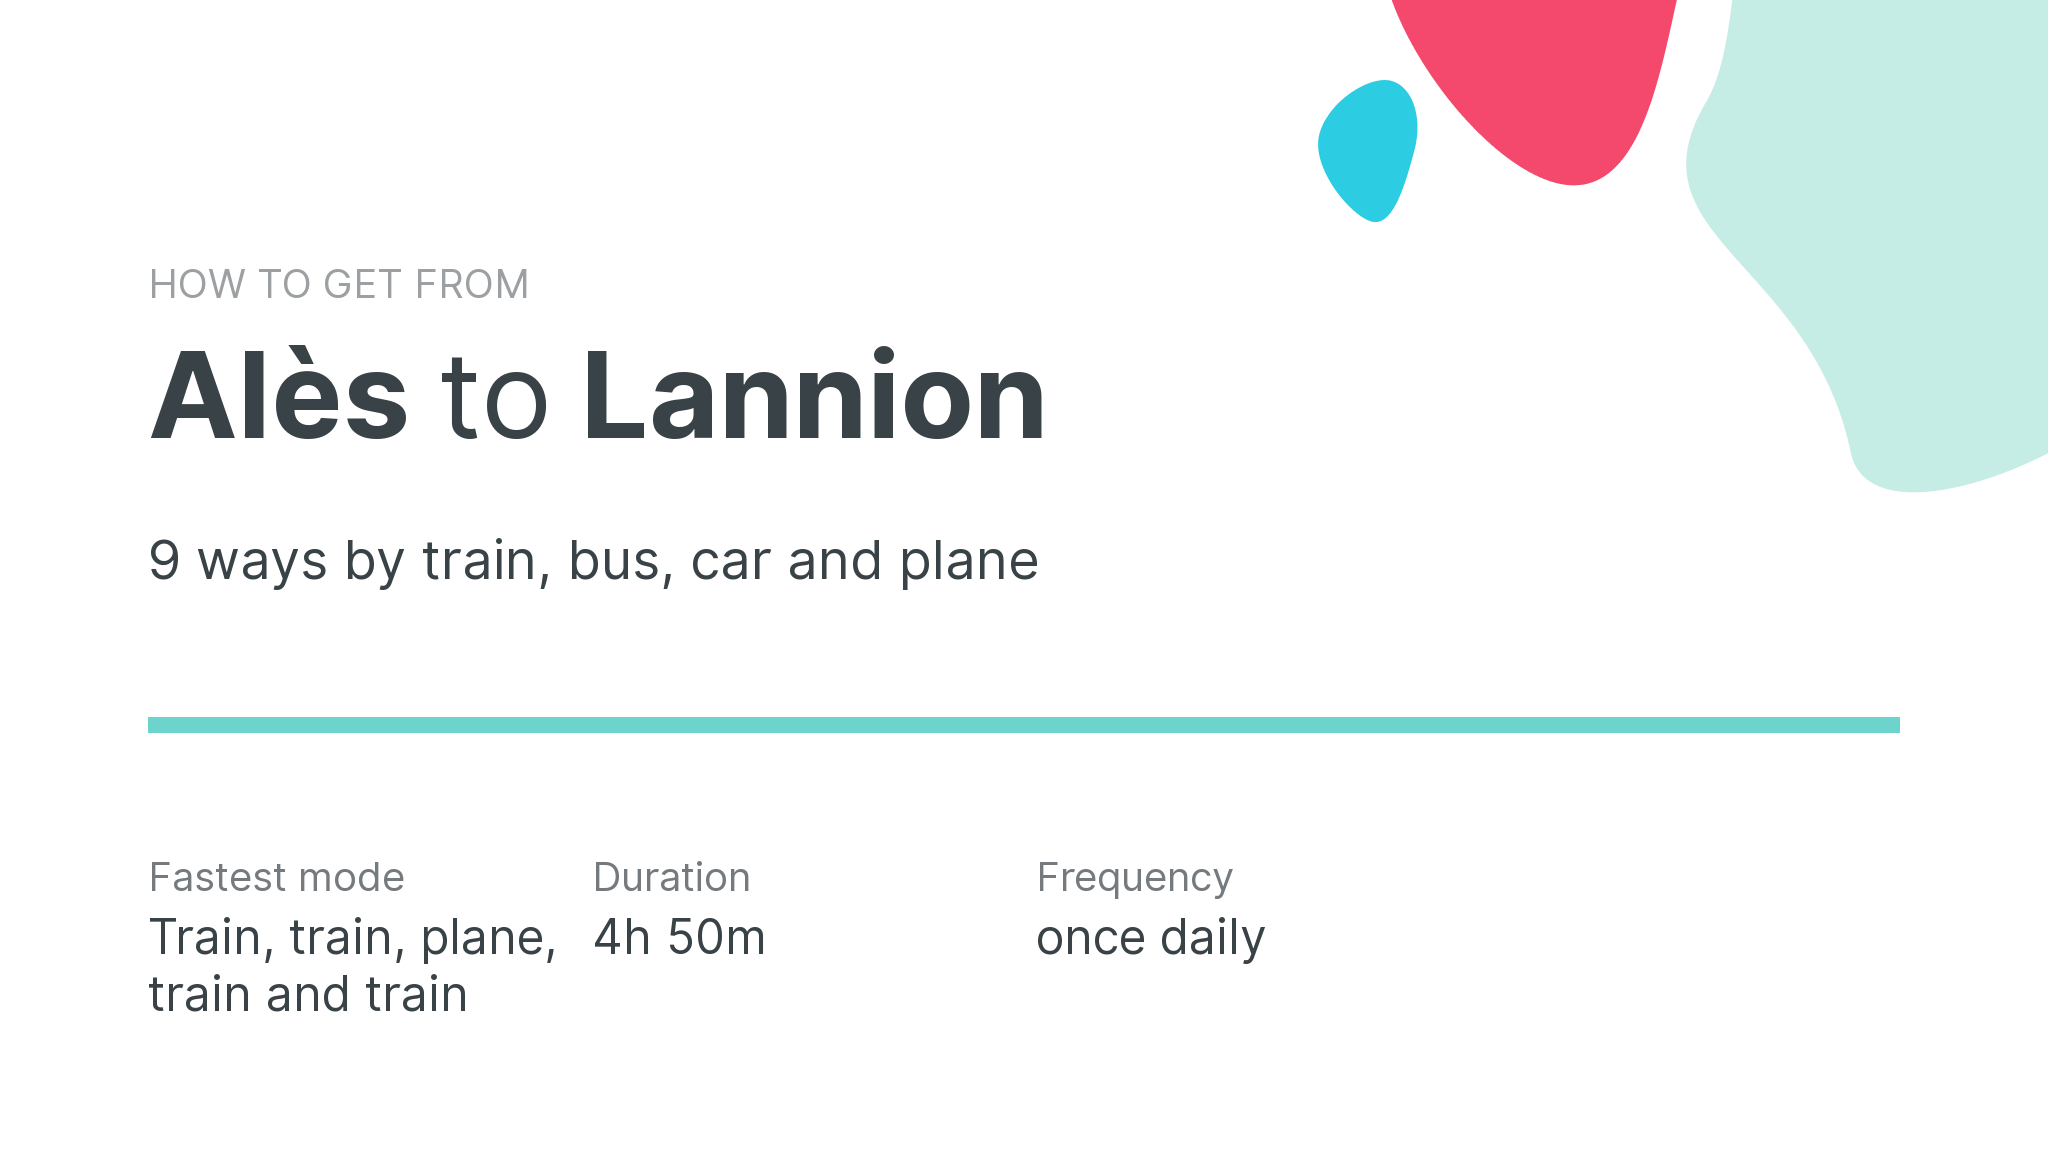 How do I get from Alès to Lannion